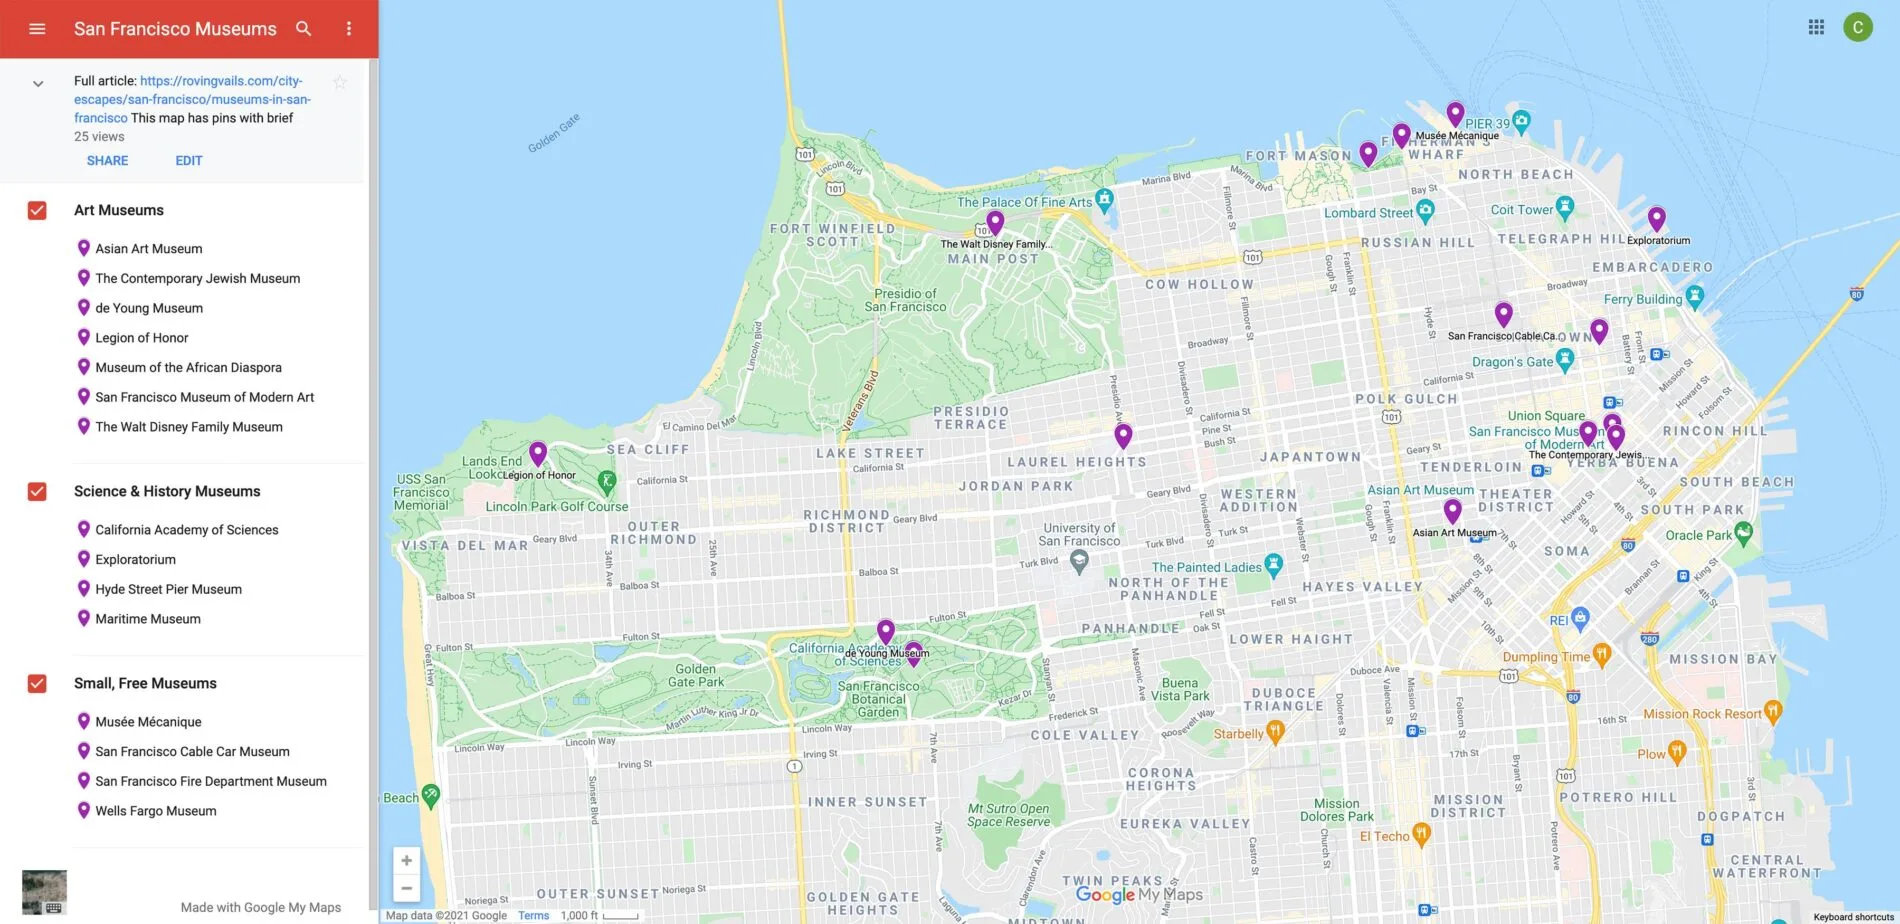 Interactive map with pins marking 15 San Francisco museums.